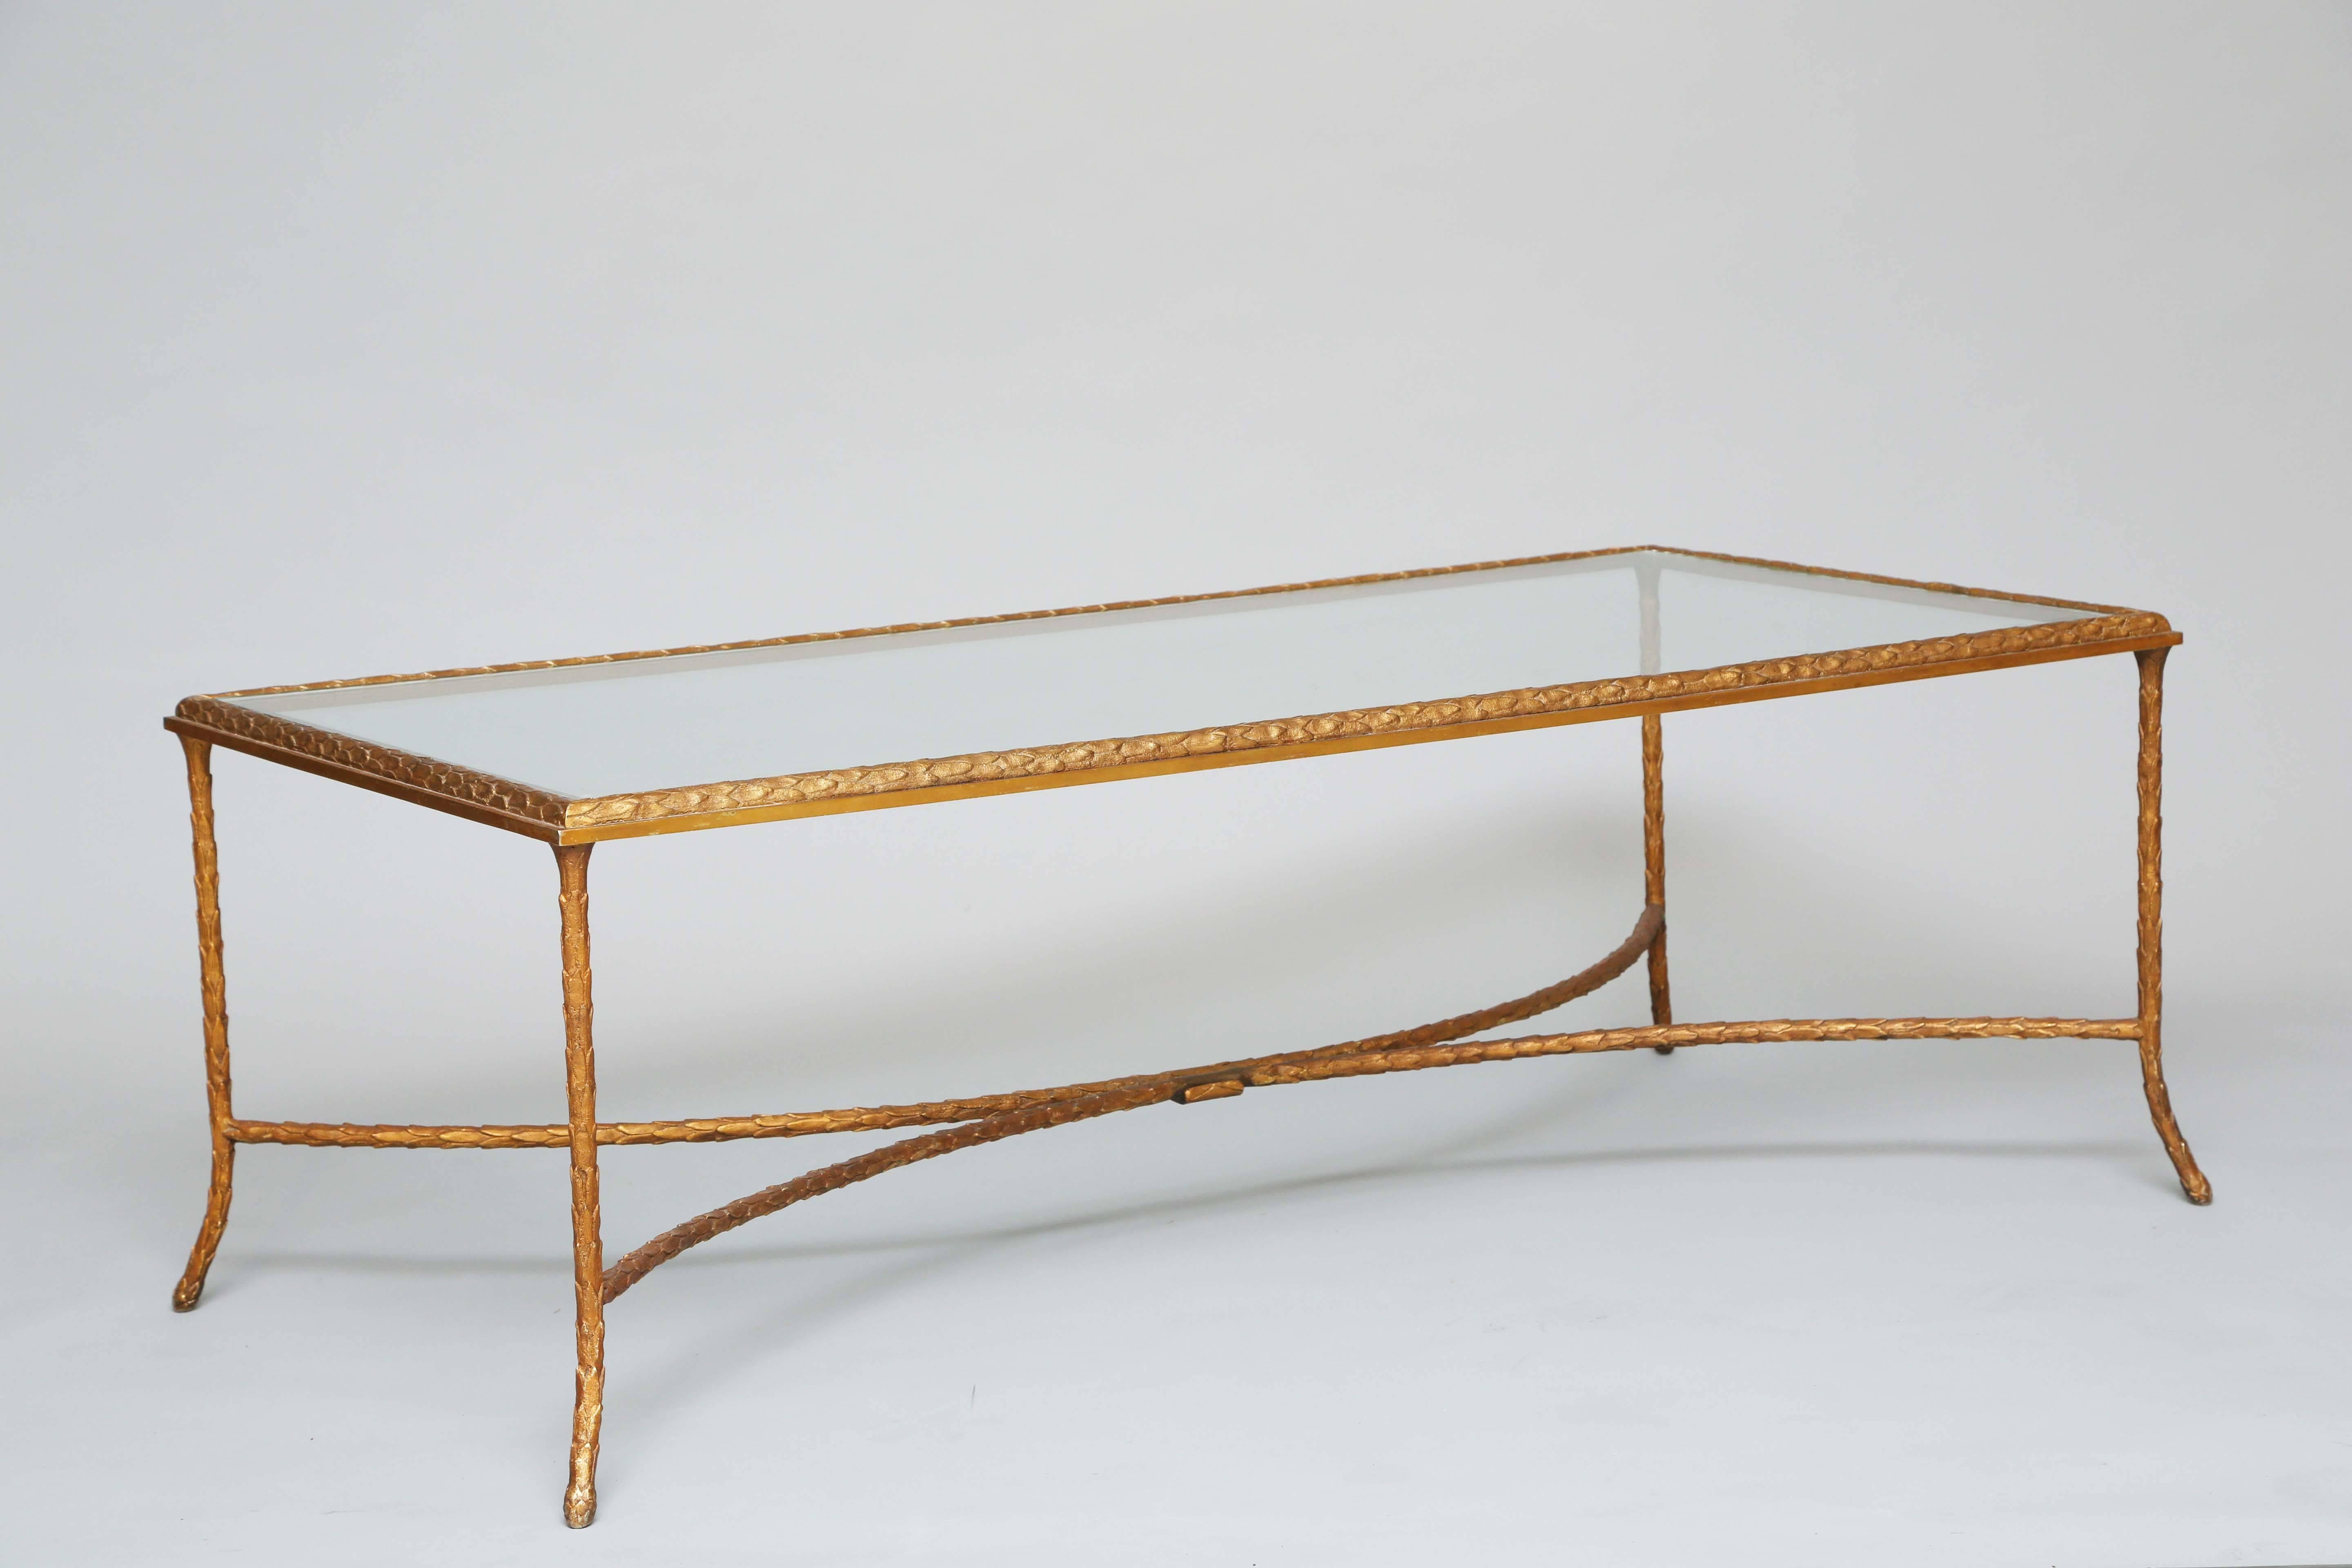 Coffee table of gilded bronze in the style of Baguès, having a rectangular top of glass on a table base of gilded bronze its foliate frame on splayed legs, with double arched stretcher.